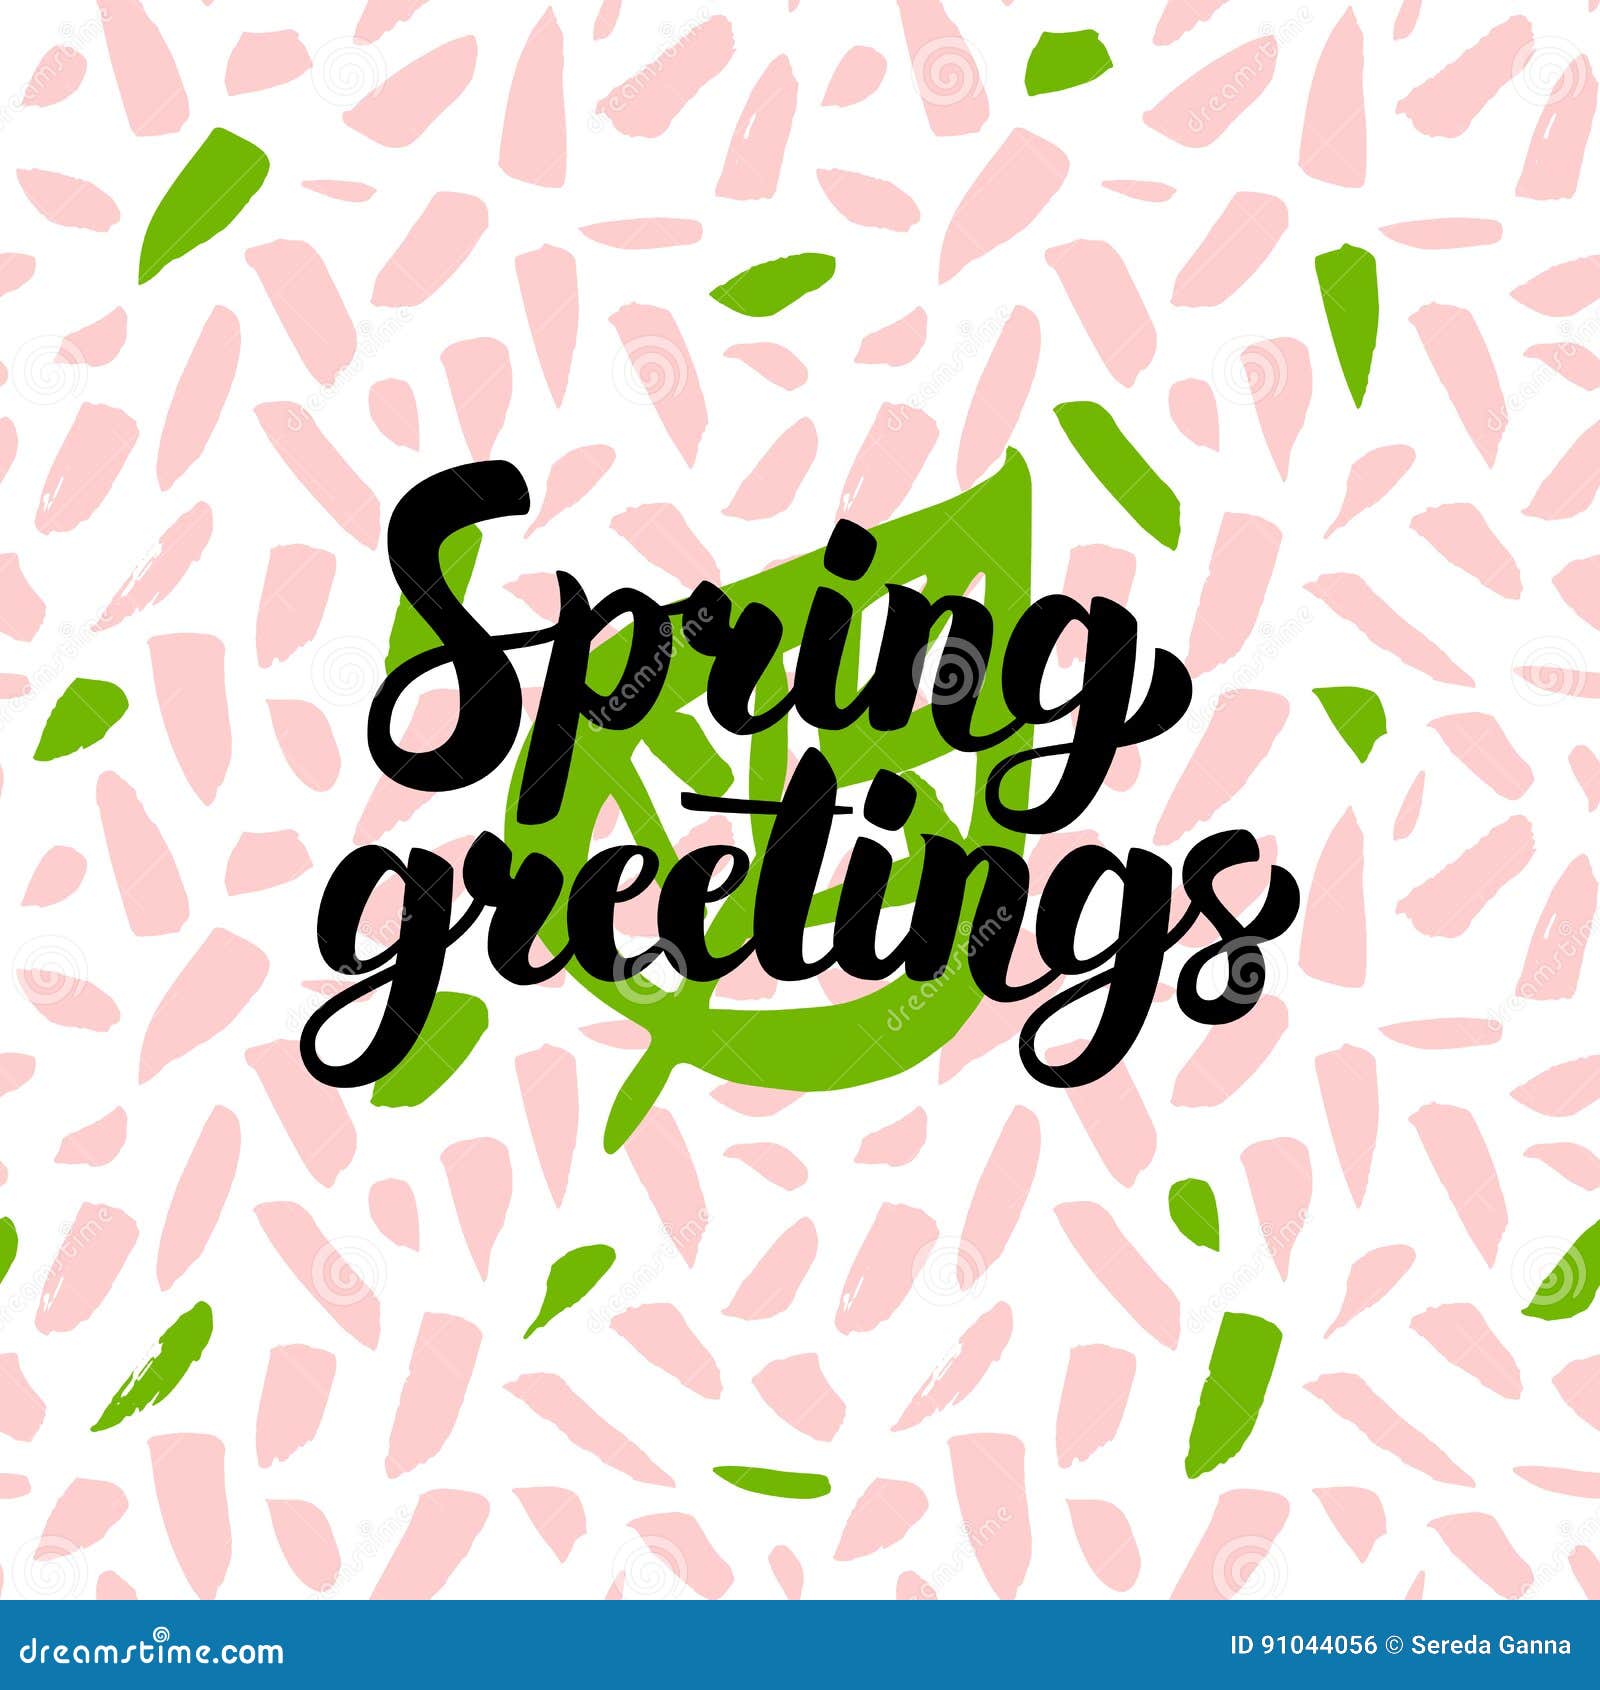 Spring Greetings Handwritten Card. Vector Illustration of Nature Seasonal Postcard with Calligraphy.